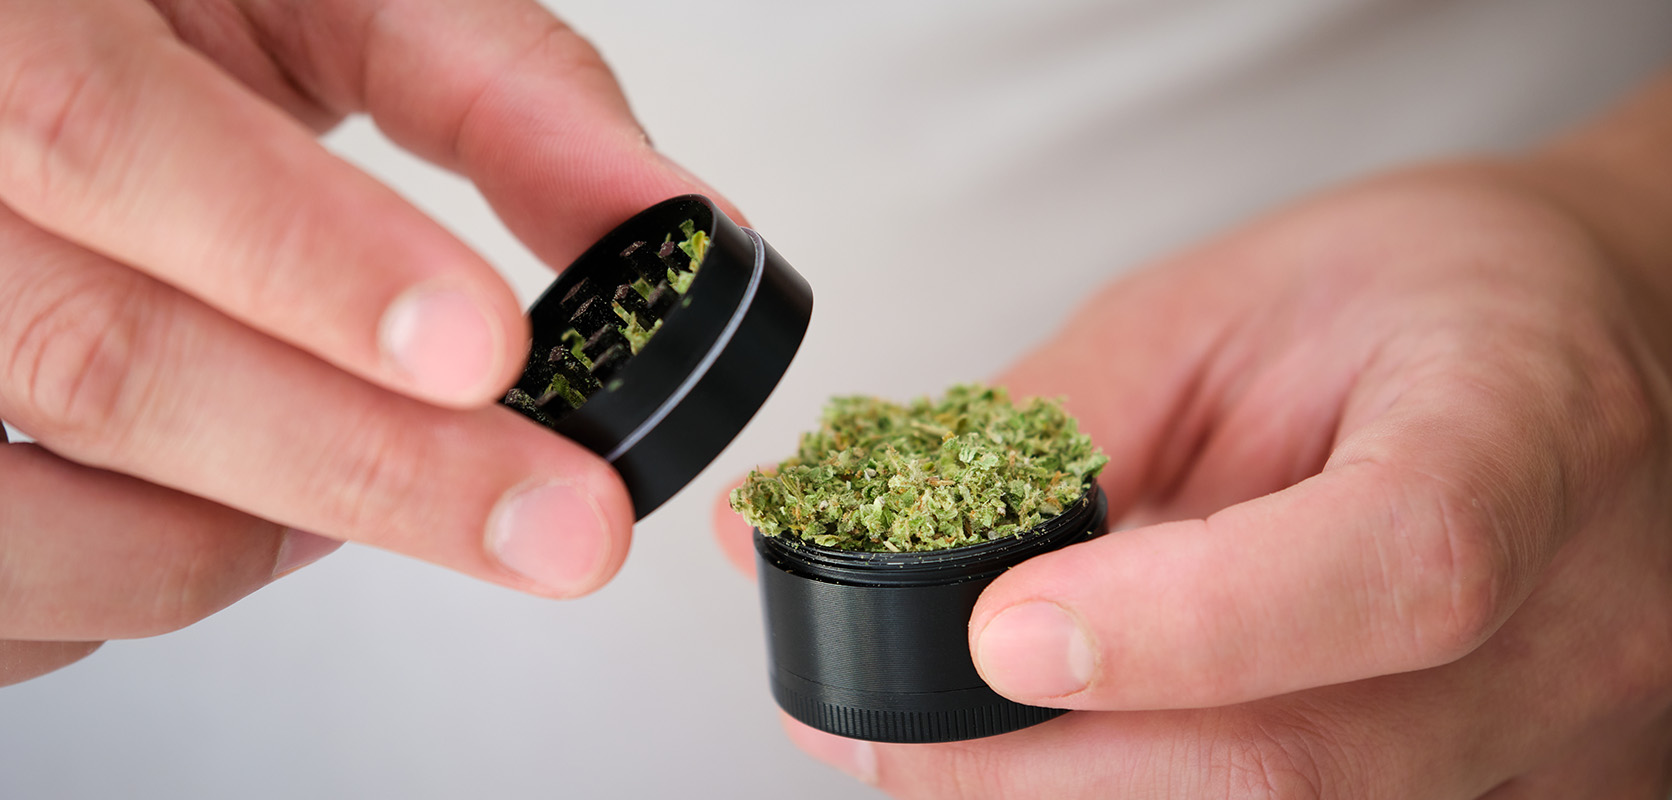 Man using a grinder to break up strong hybrid weed from online dispensary Canada Low Price Bud. Mail order marijuana value buds, shatter, gummys, and concentrates